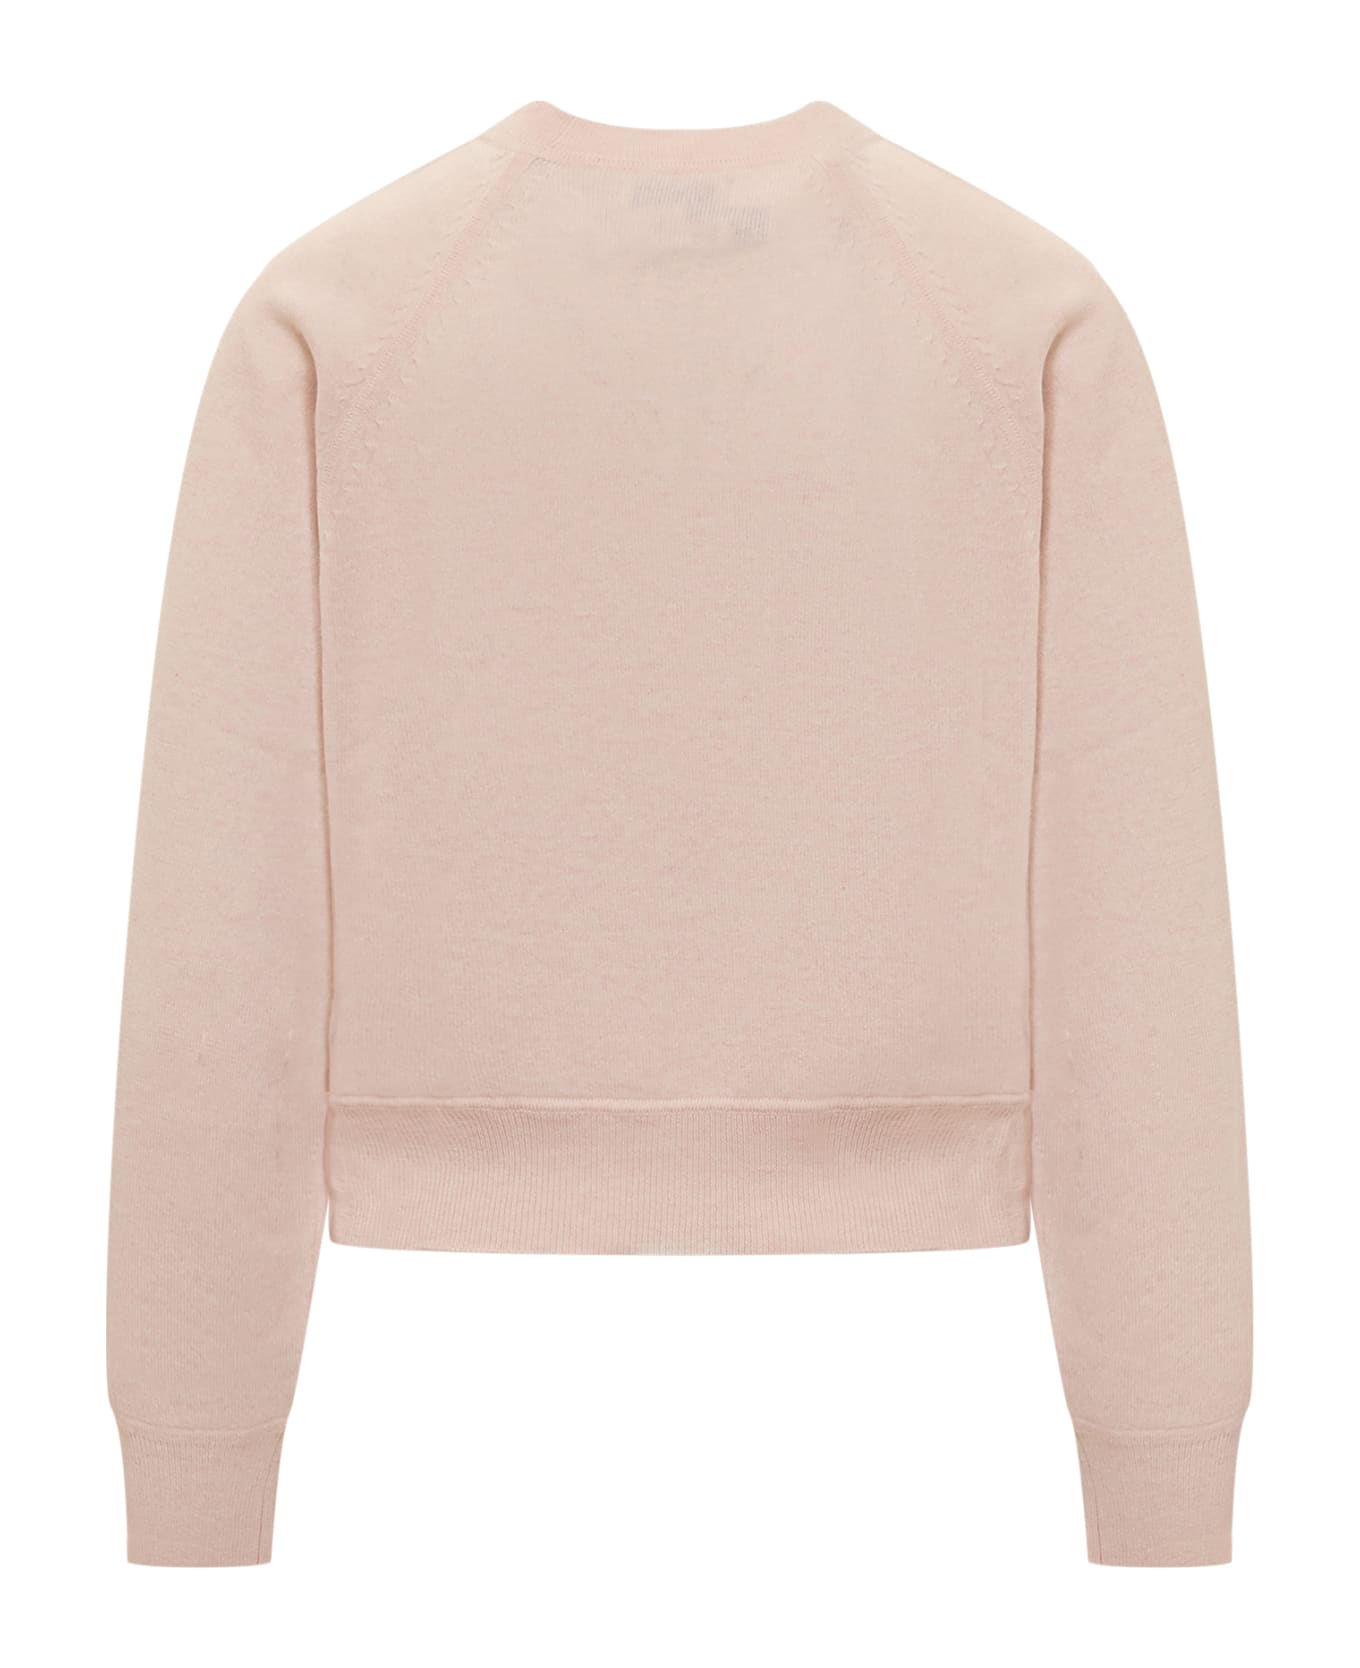 Loulou Studio Loulou Cashmere Sweater - PINK